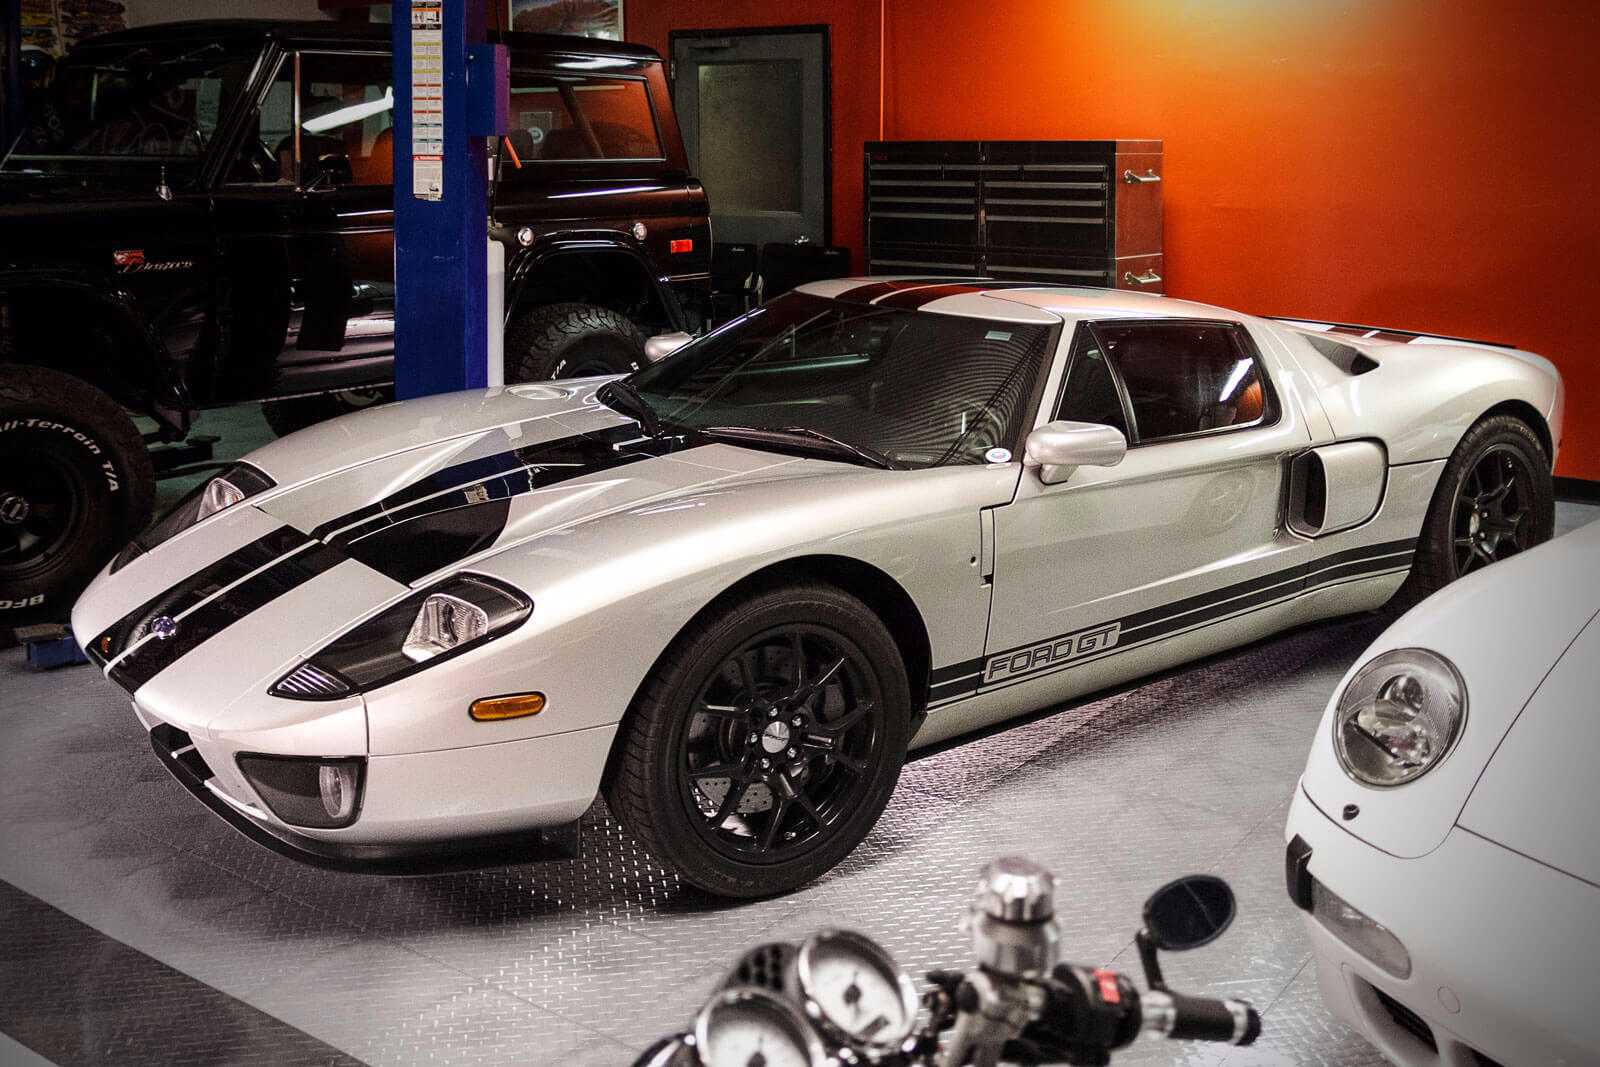 Ford GT and more vehicles in a RaceDeck Diamond floored garage